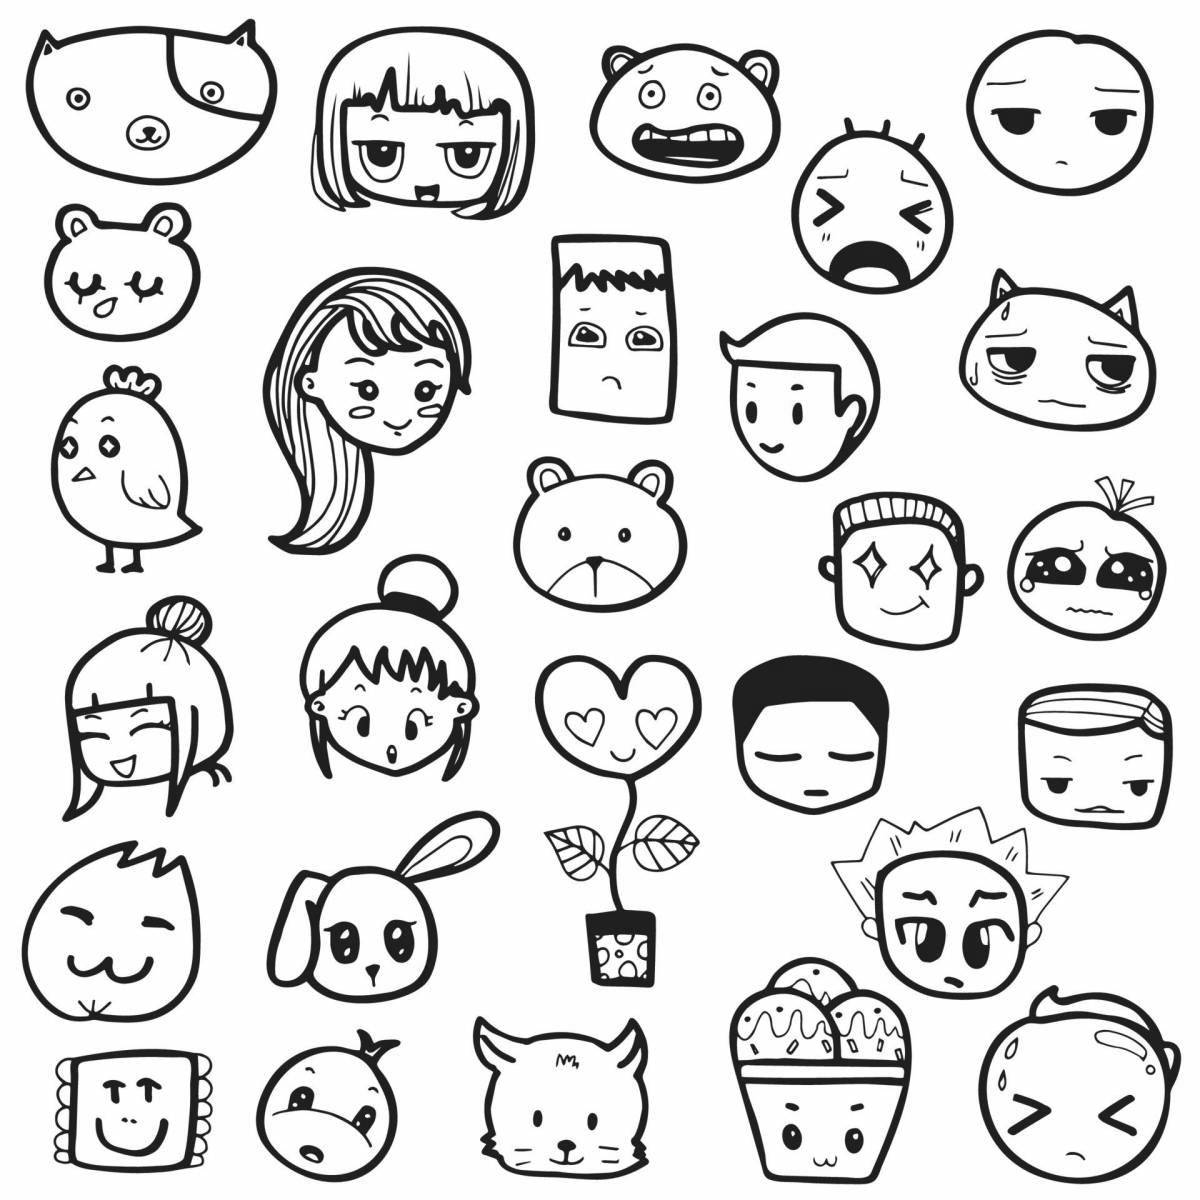 Playful coloring small emoticons for stickers